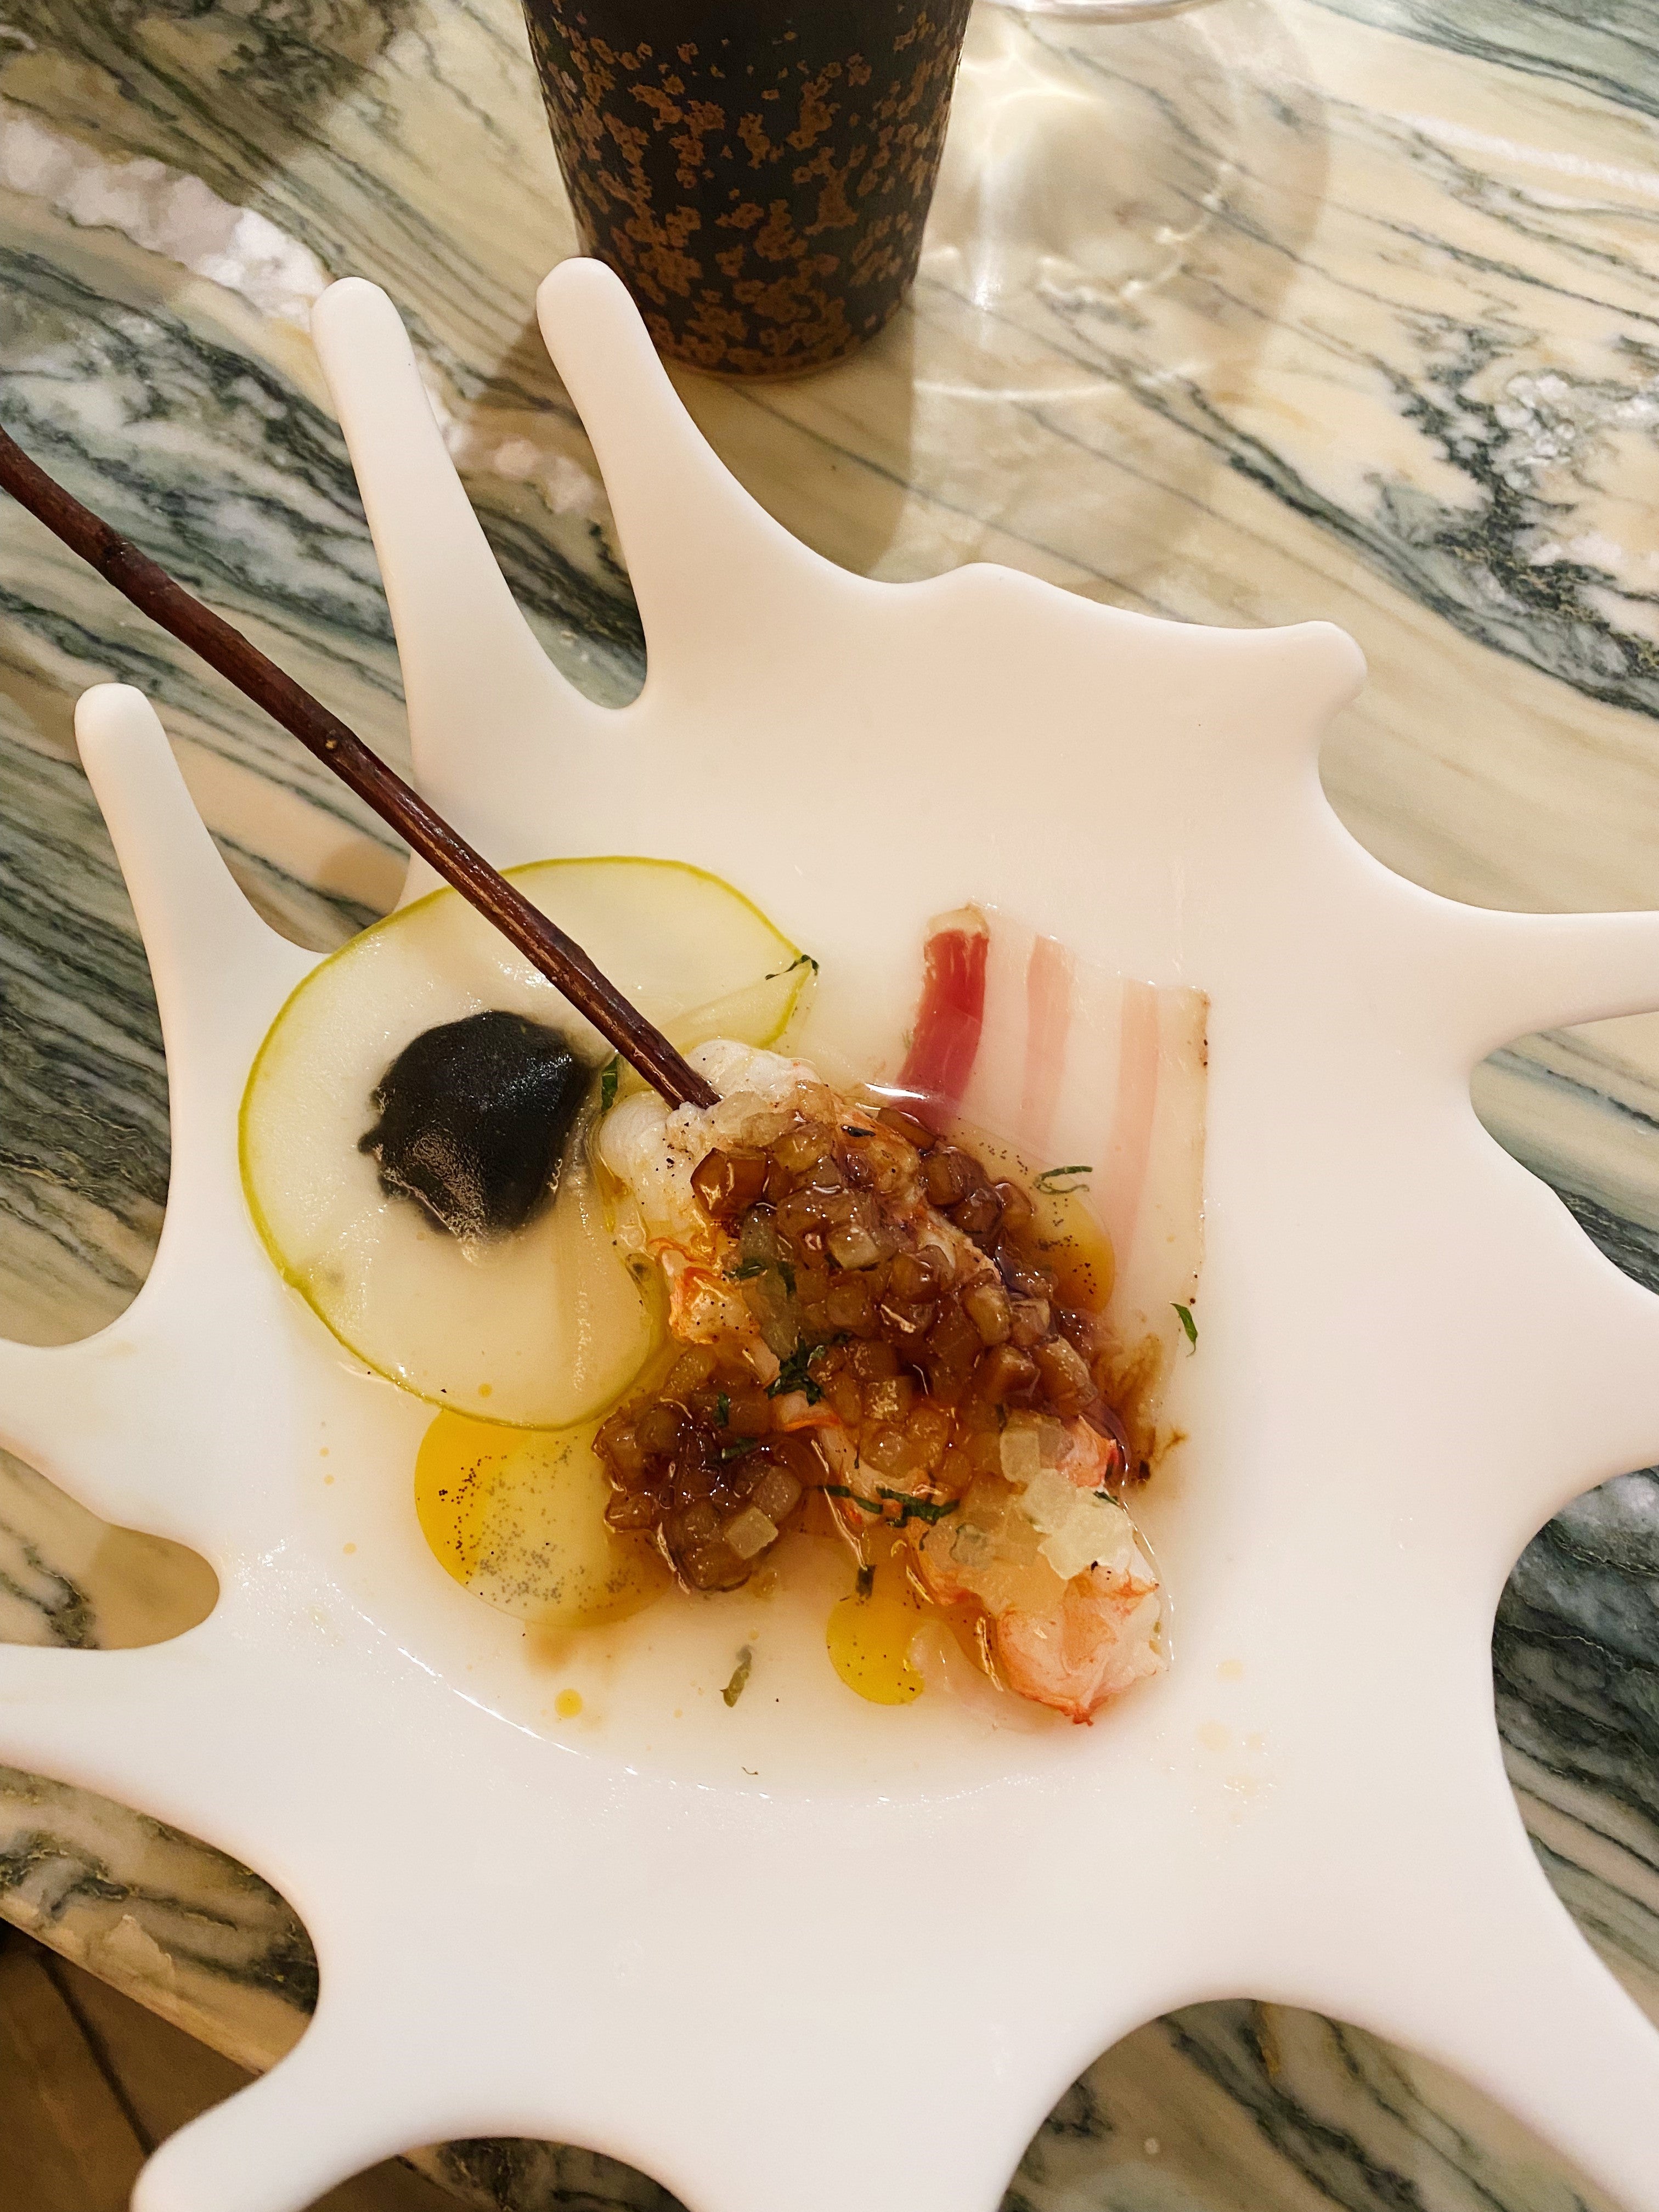 ‘Conquering the beech tree’: Langoustine, pork fat and burnt apple